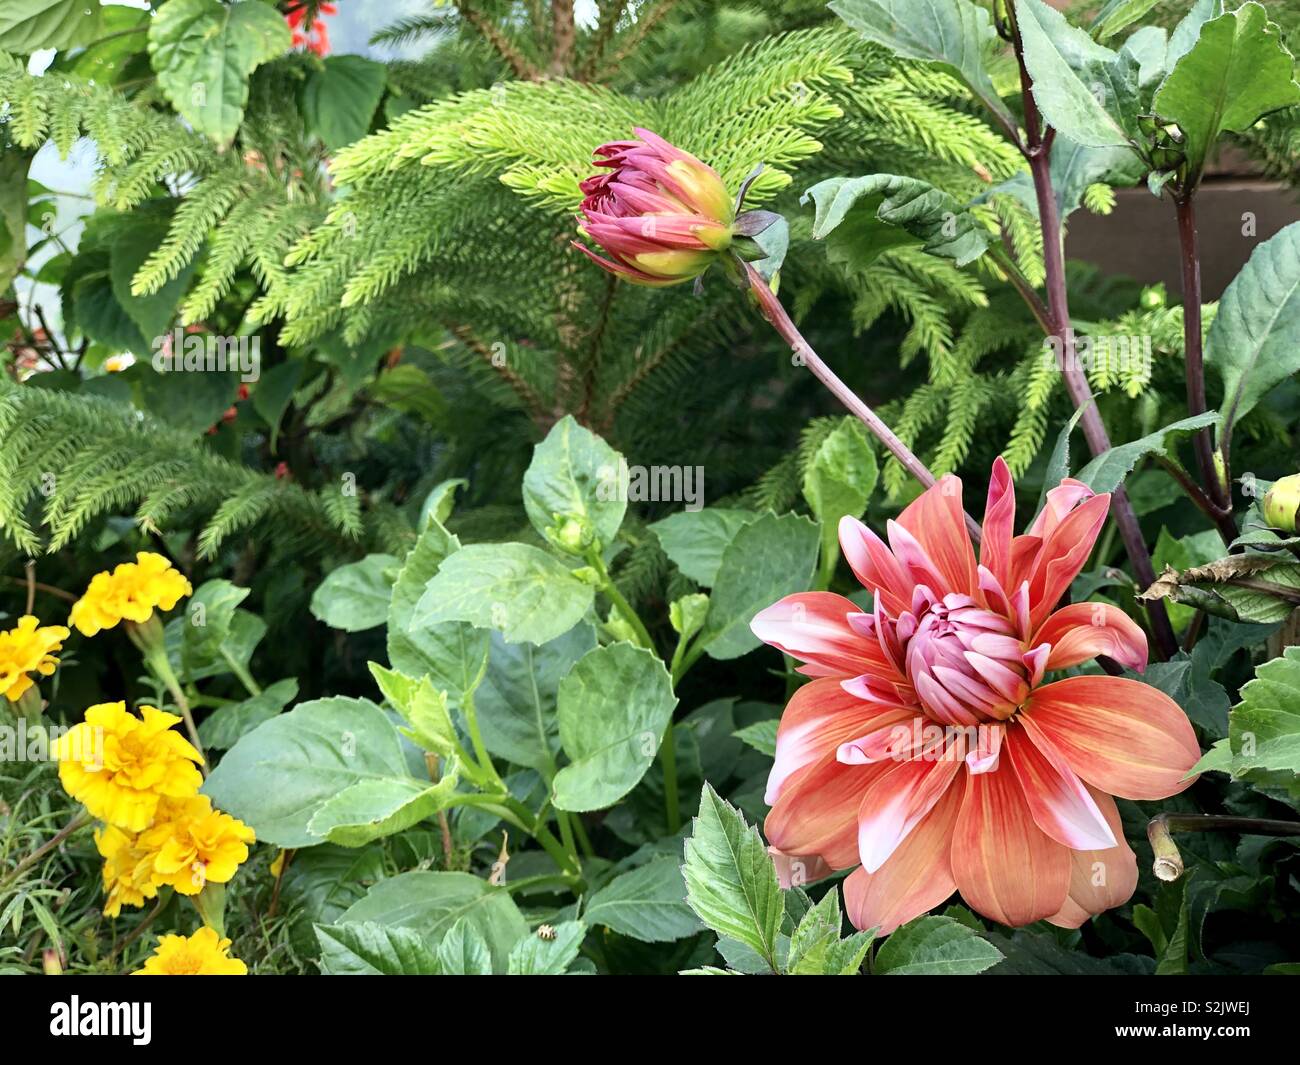 Beautiful Dahlia Flower And Buds At India Gate Compound In New